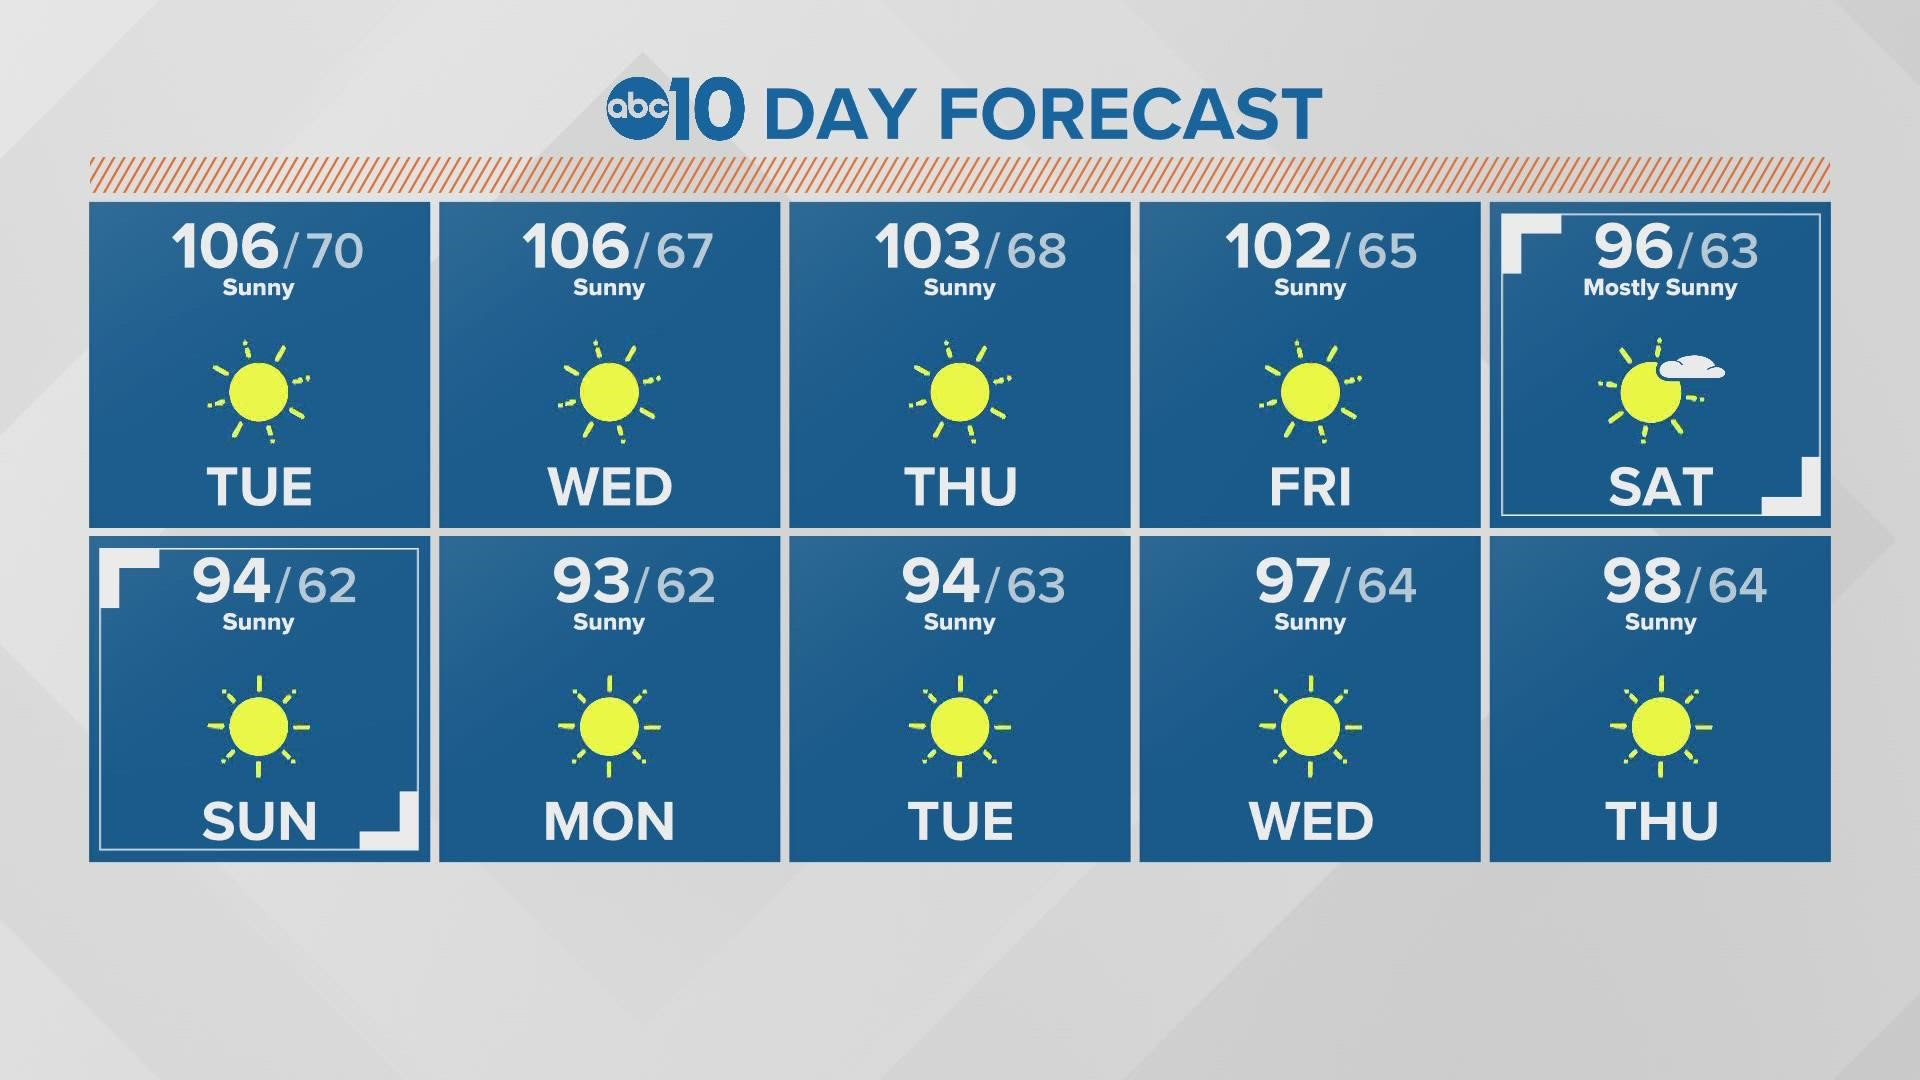 ABC10 Meteorologist Rob Carlmark tells us what to expect for the next 10 days of weather.